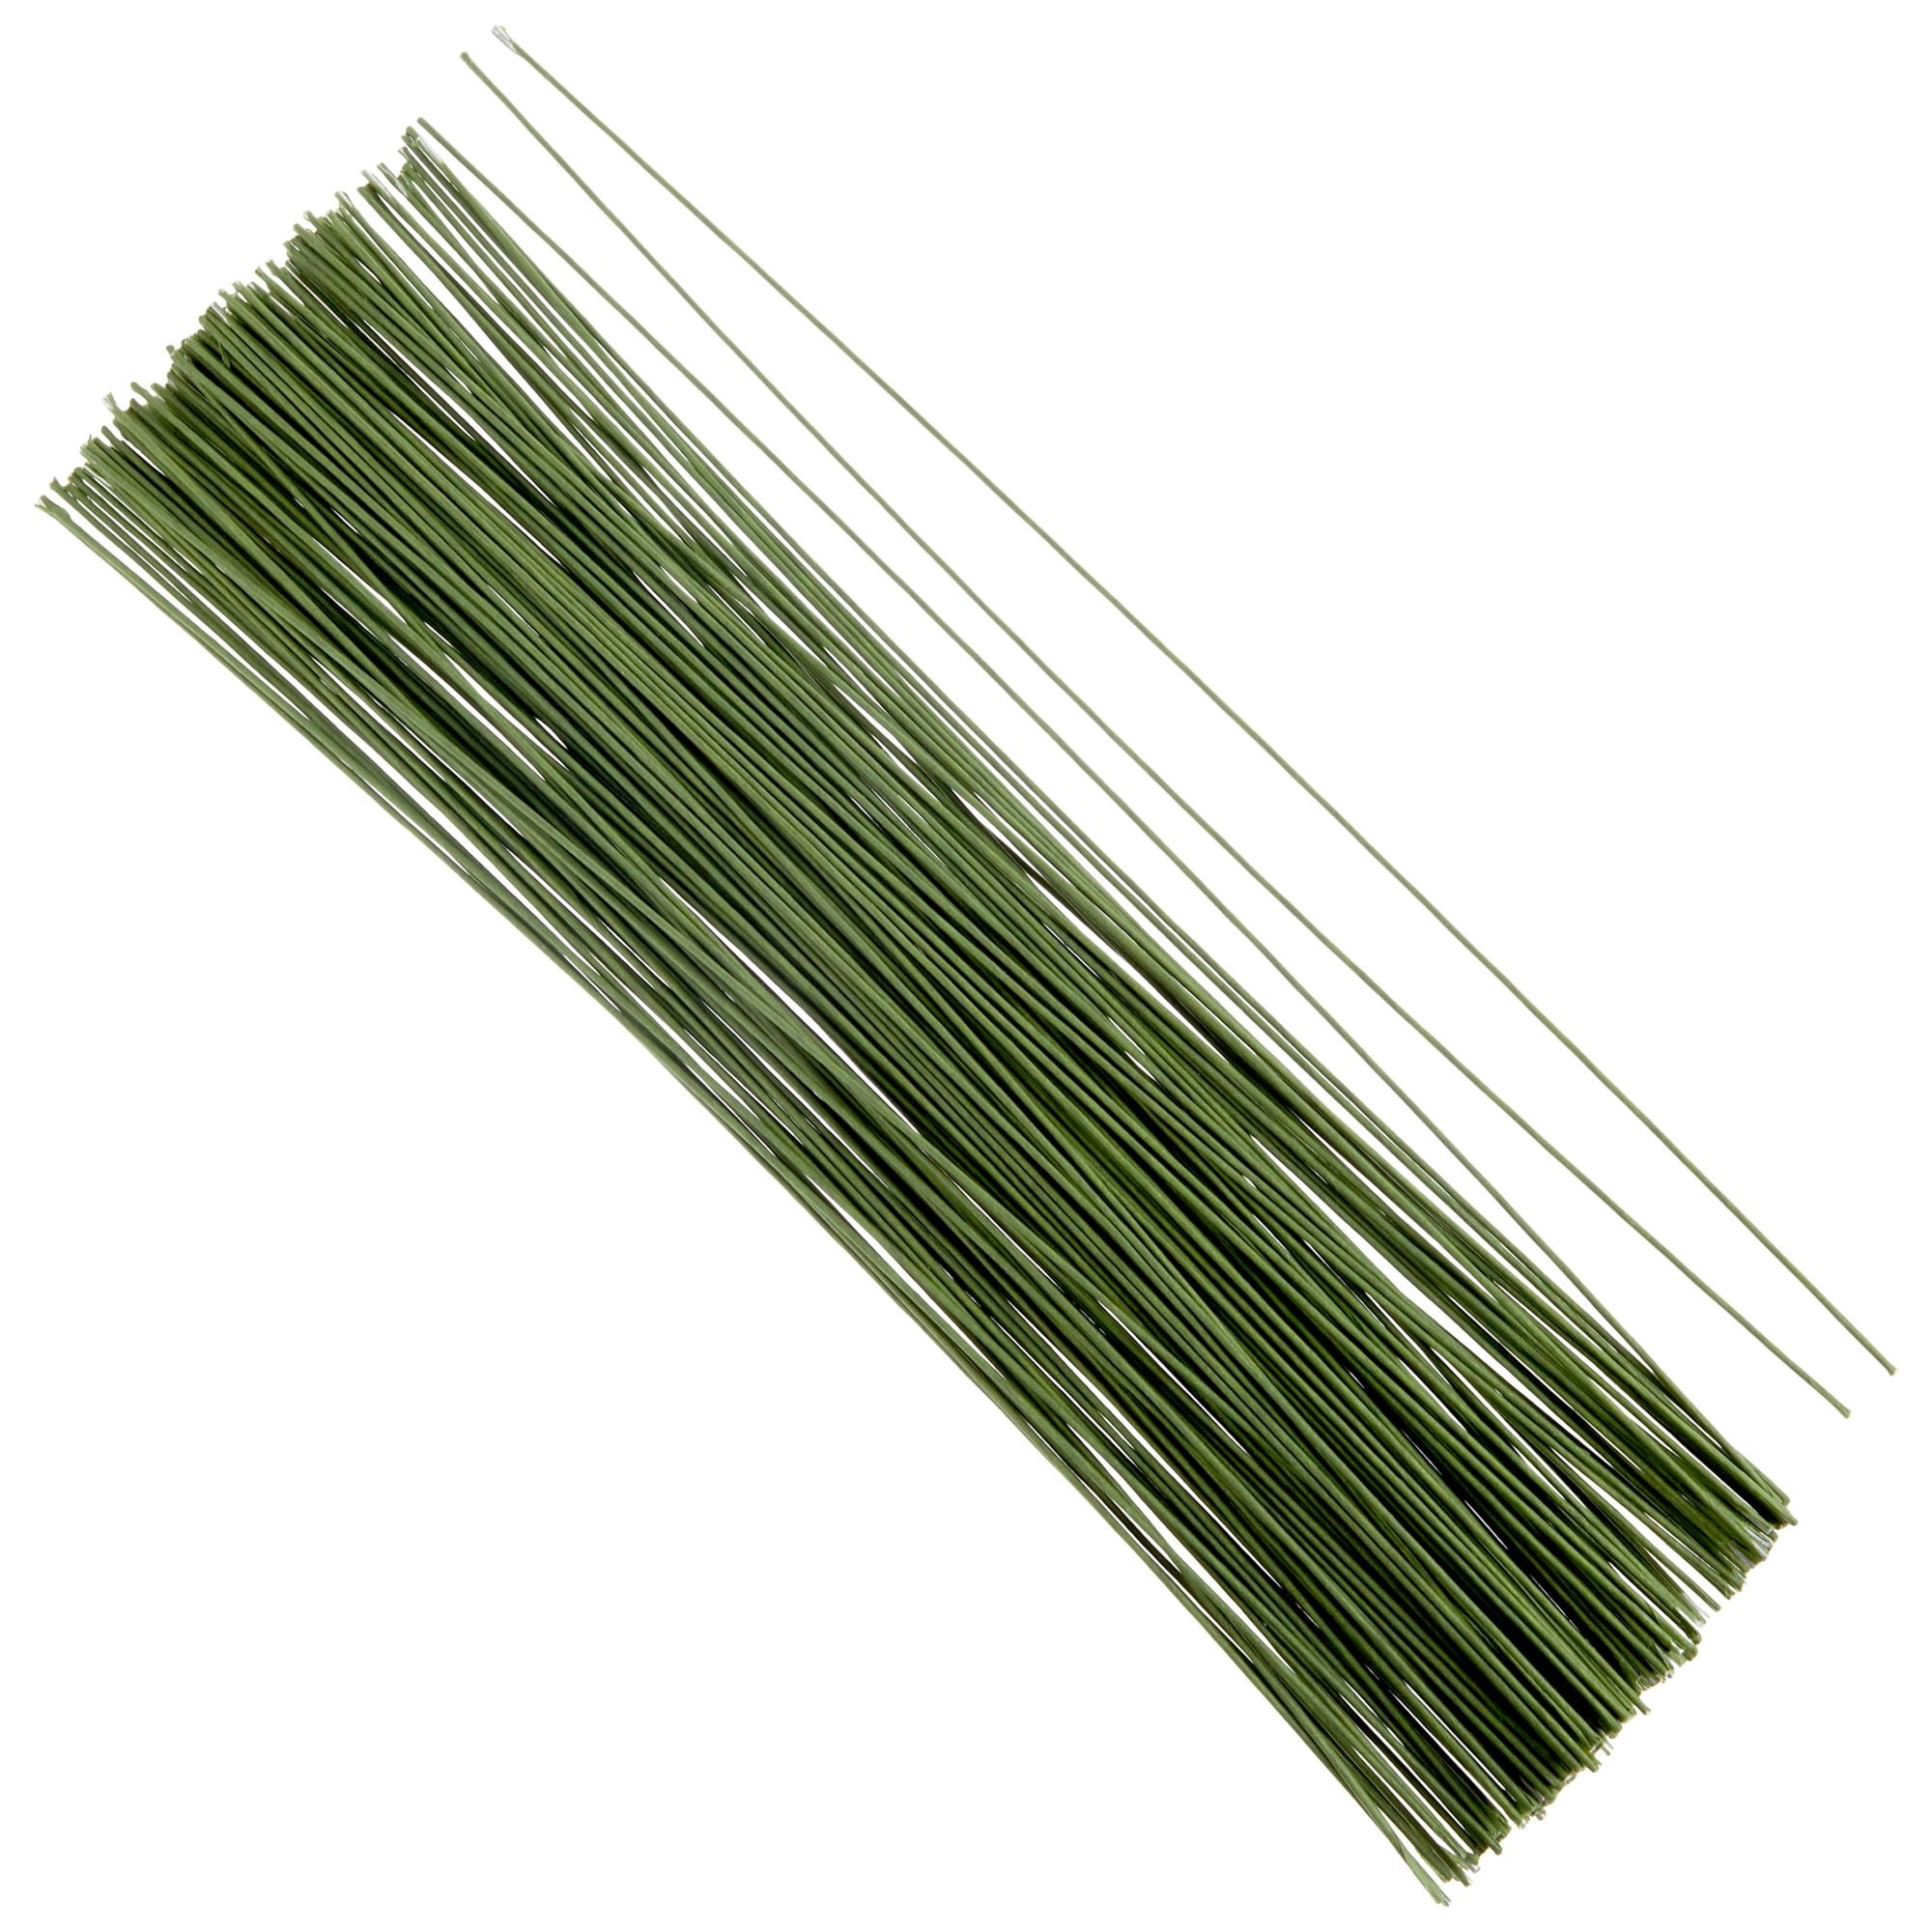 200 Pcs Floral Stem Wire 14 Gauge 15.75 Inches Length, Green Floral Wire,  Floral Paper Wrapped Wire For Flower Making, Diy Floral Arrangements And  Tio